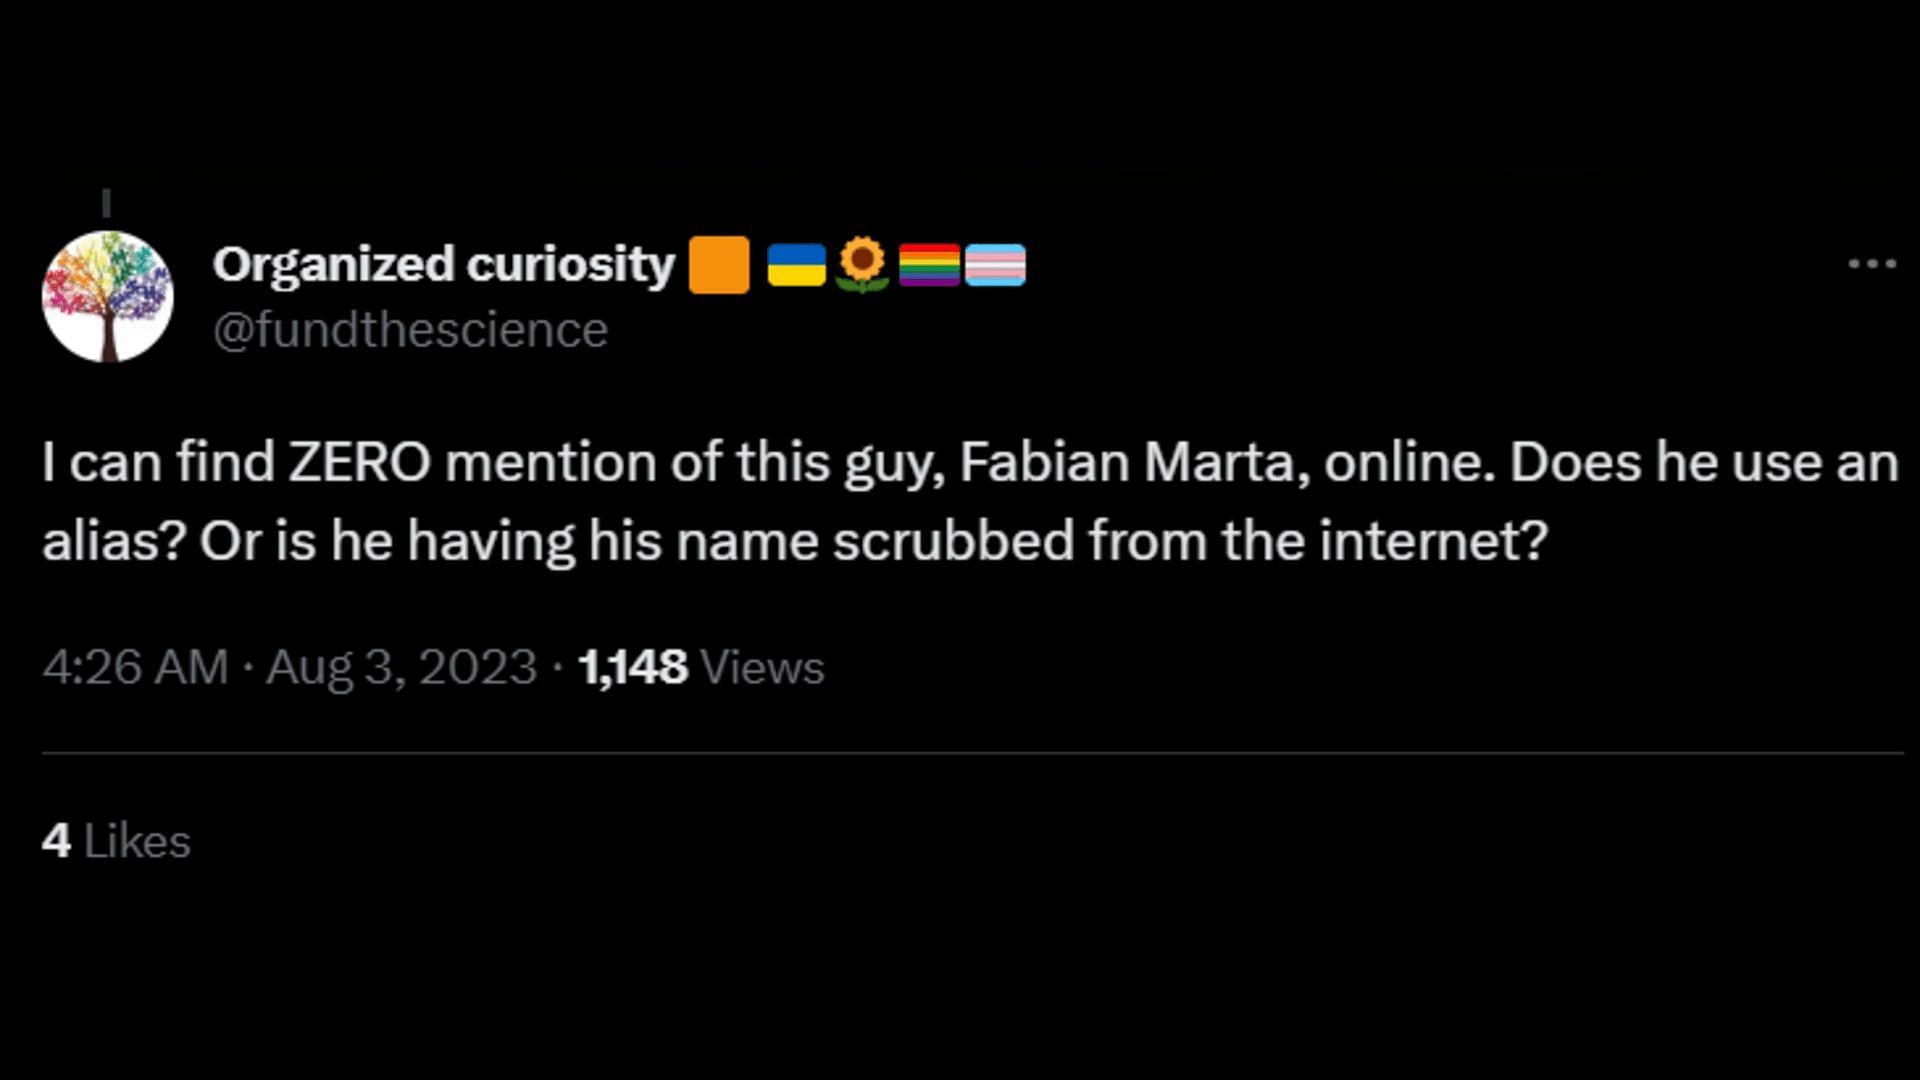 A netizen thinks Fabian Marta is trying to erase his name from the internet. (Image via Twitter/Organized curiosity)